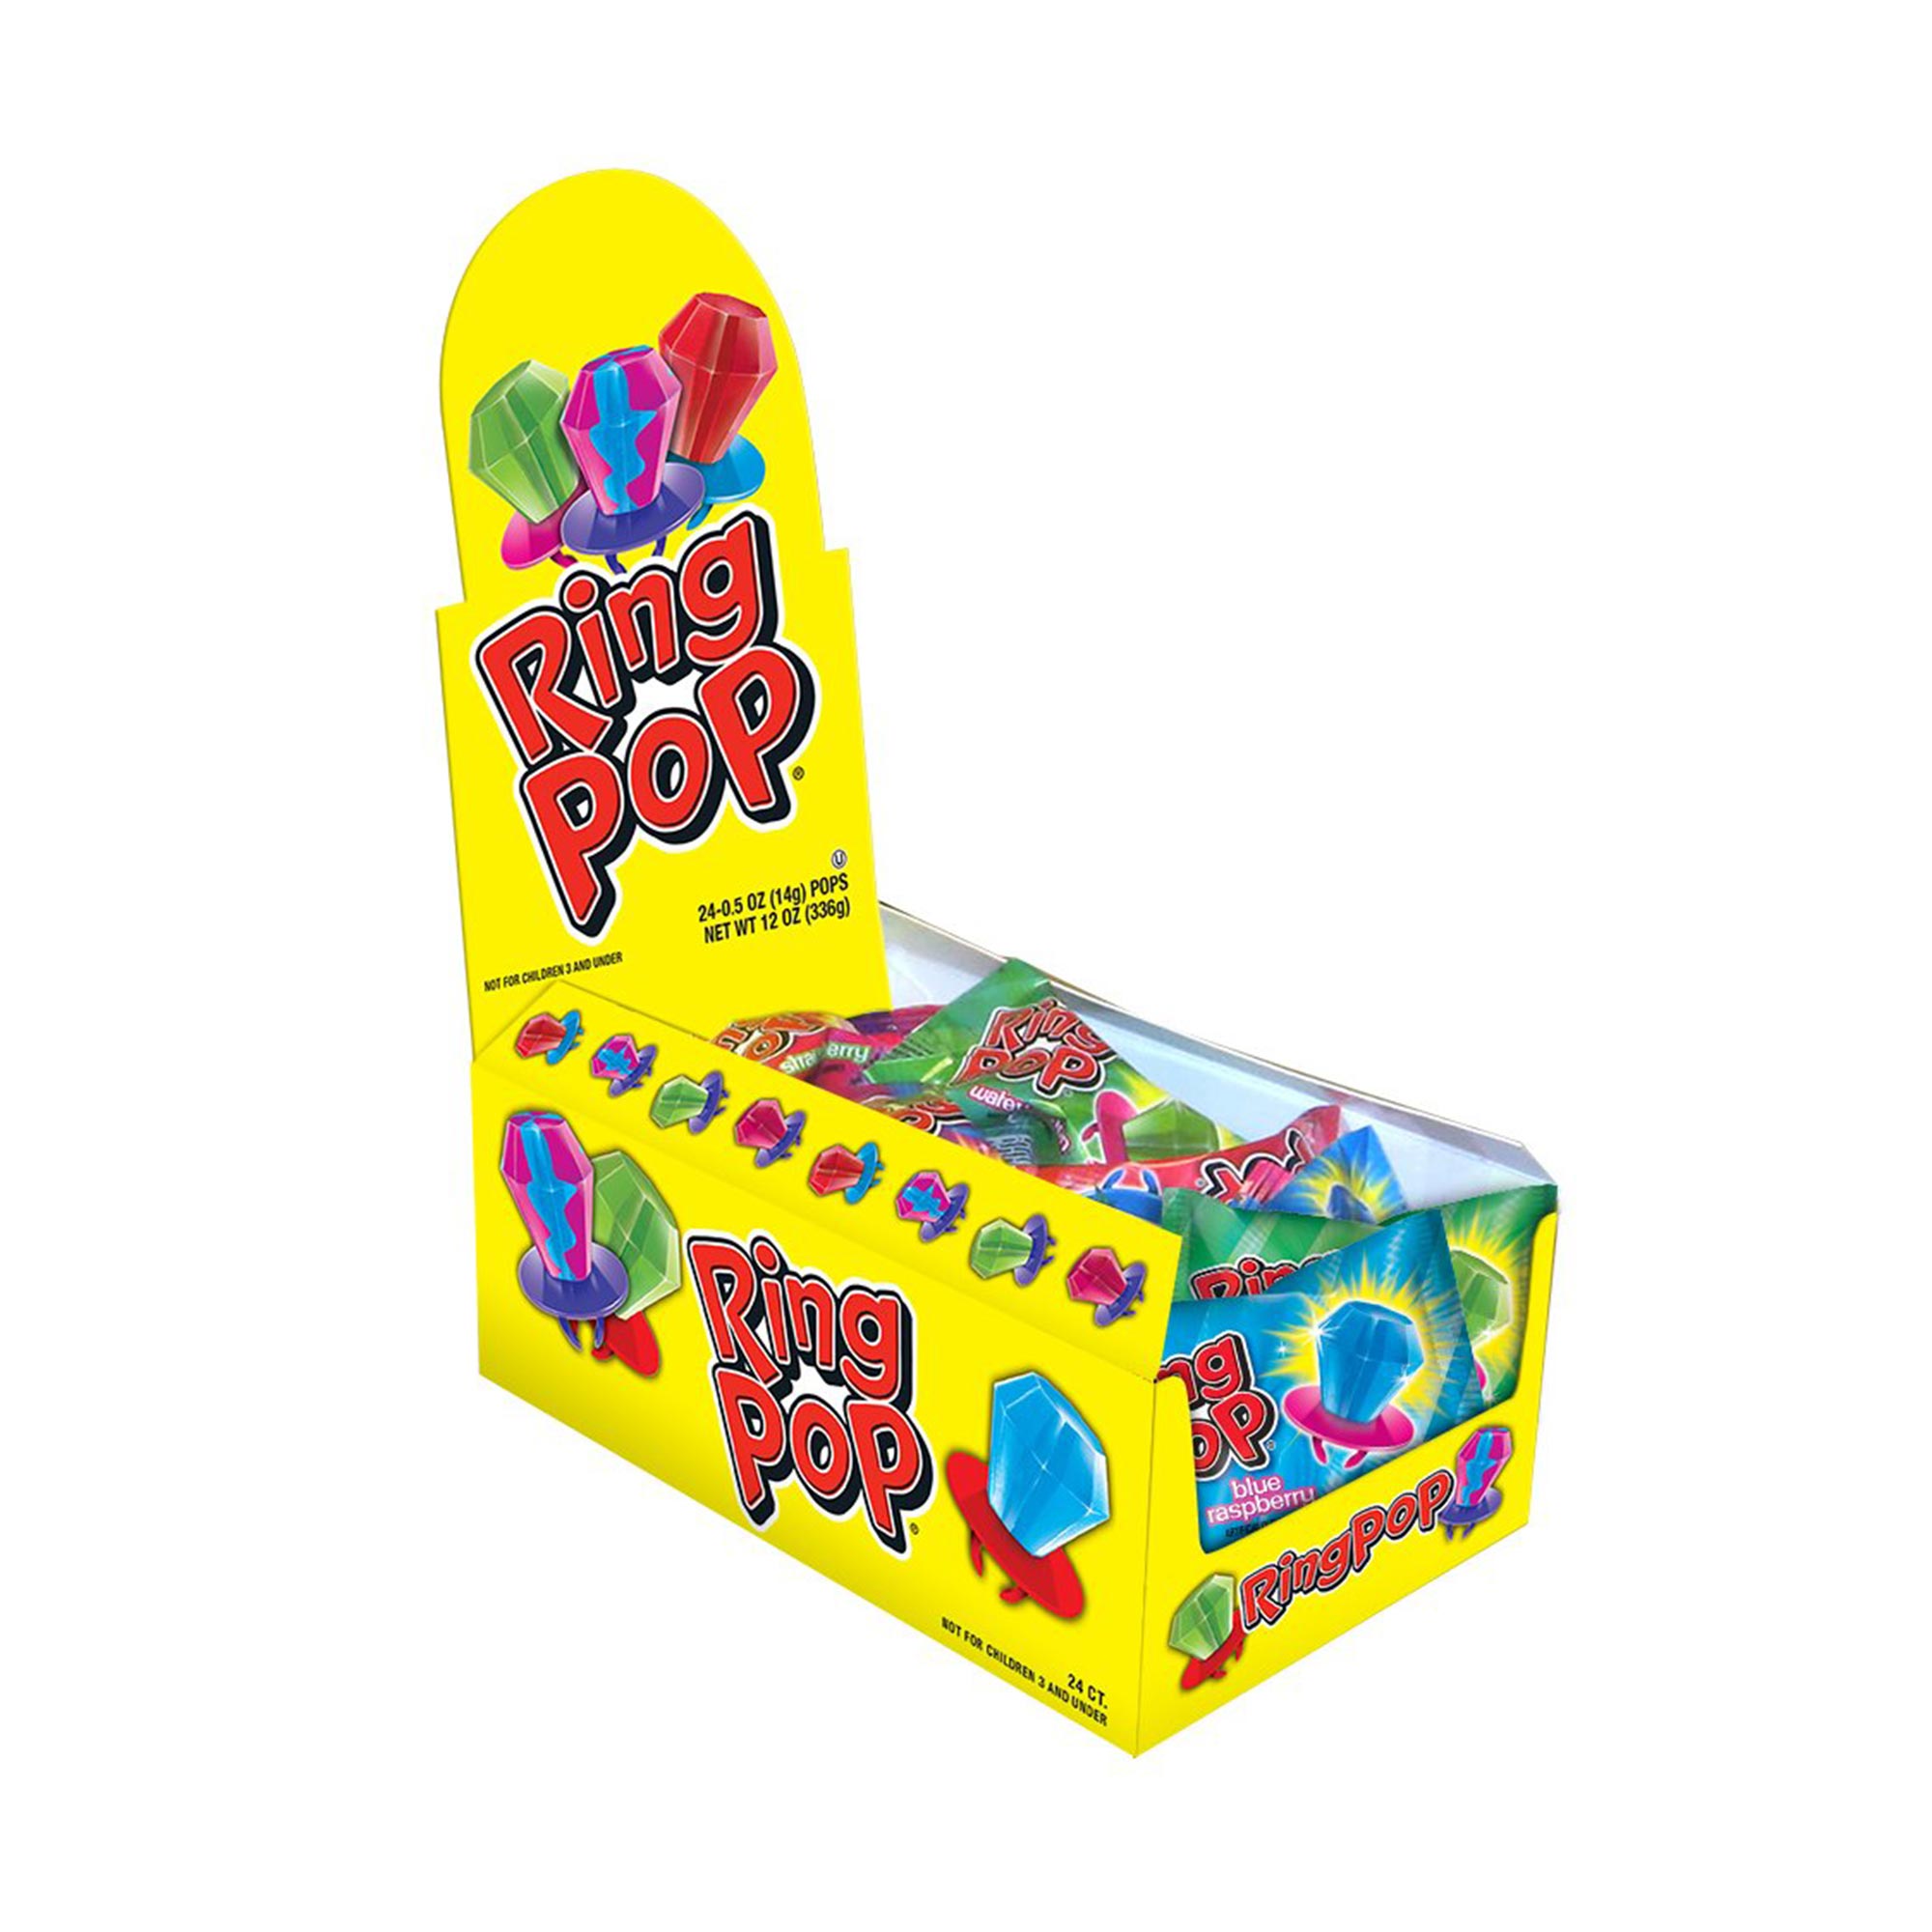 Ring Pop®, 24 ct box, assorted flavors.